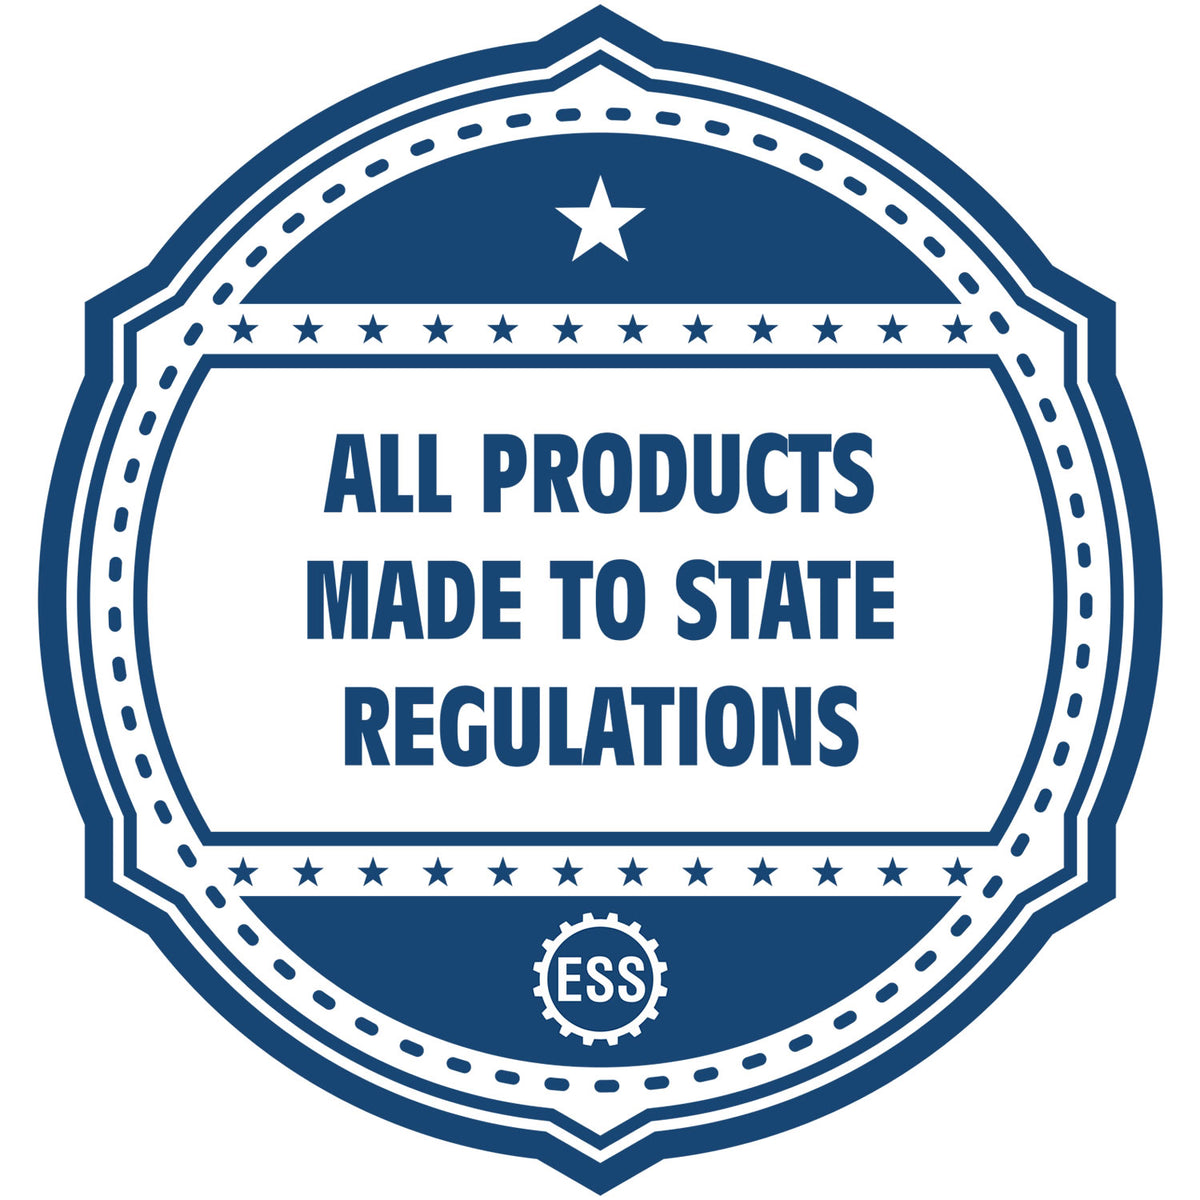 An icon or badge element for the Heavy-Duty North Dakota Rectangular Notary Stamp showing that this product is made in compliance with state regulations.